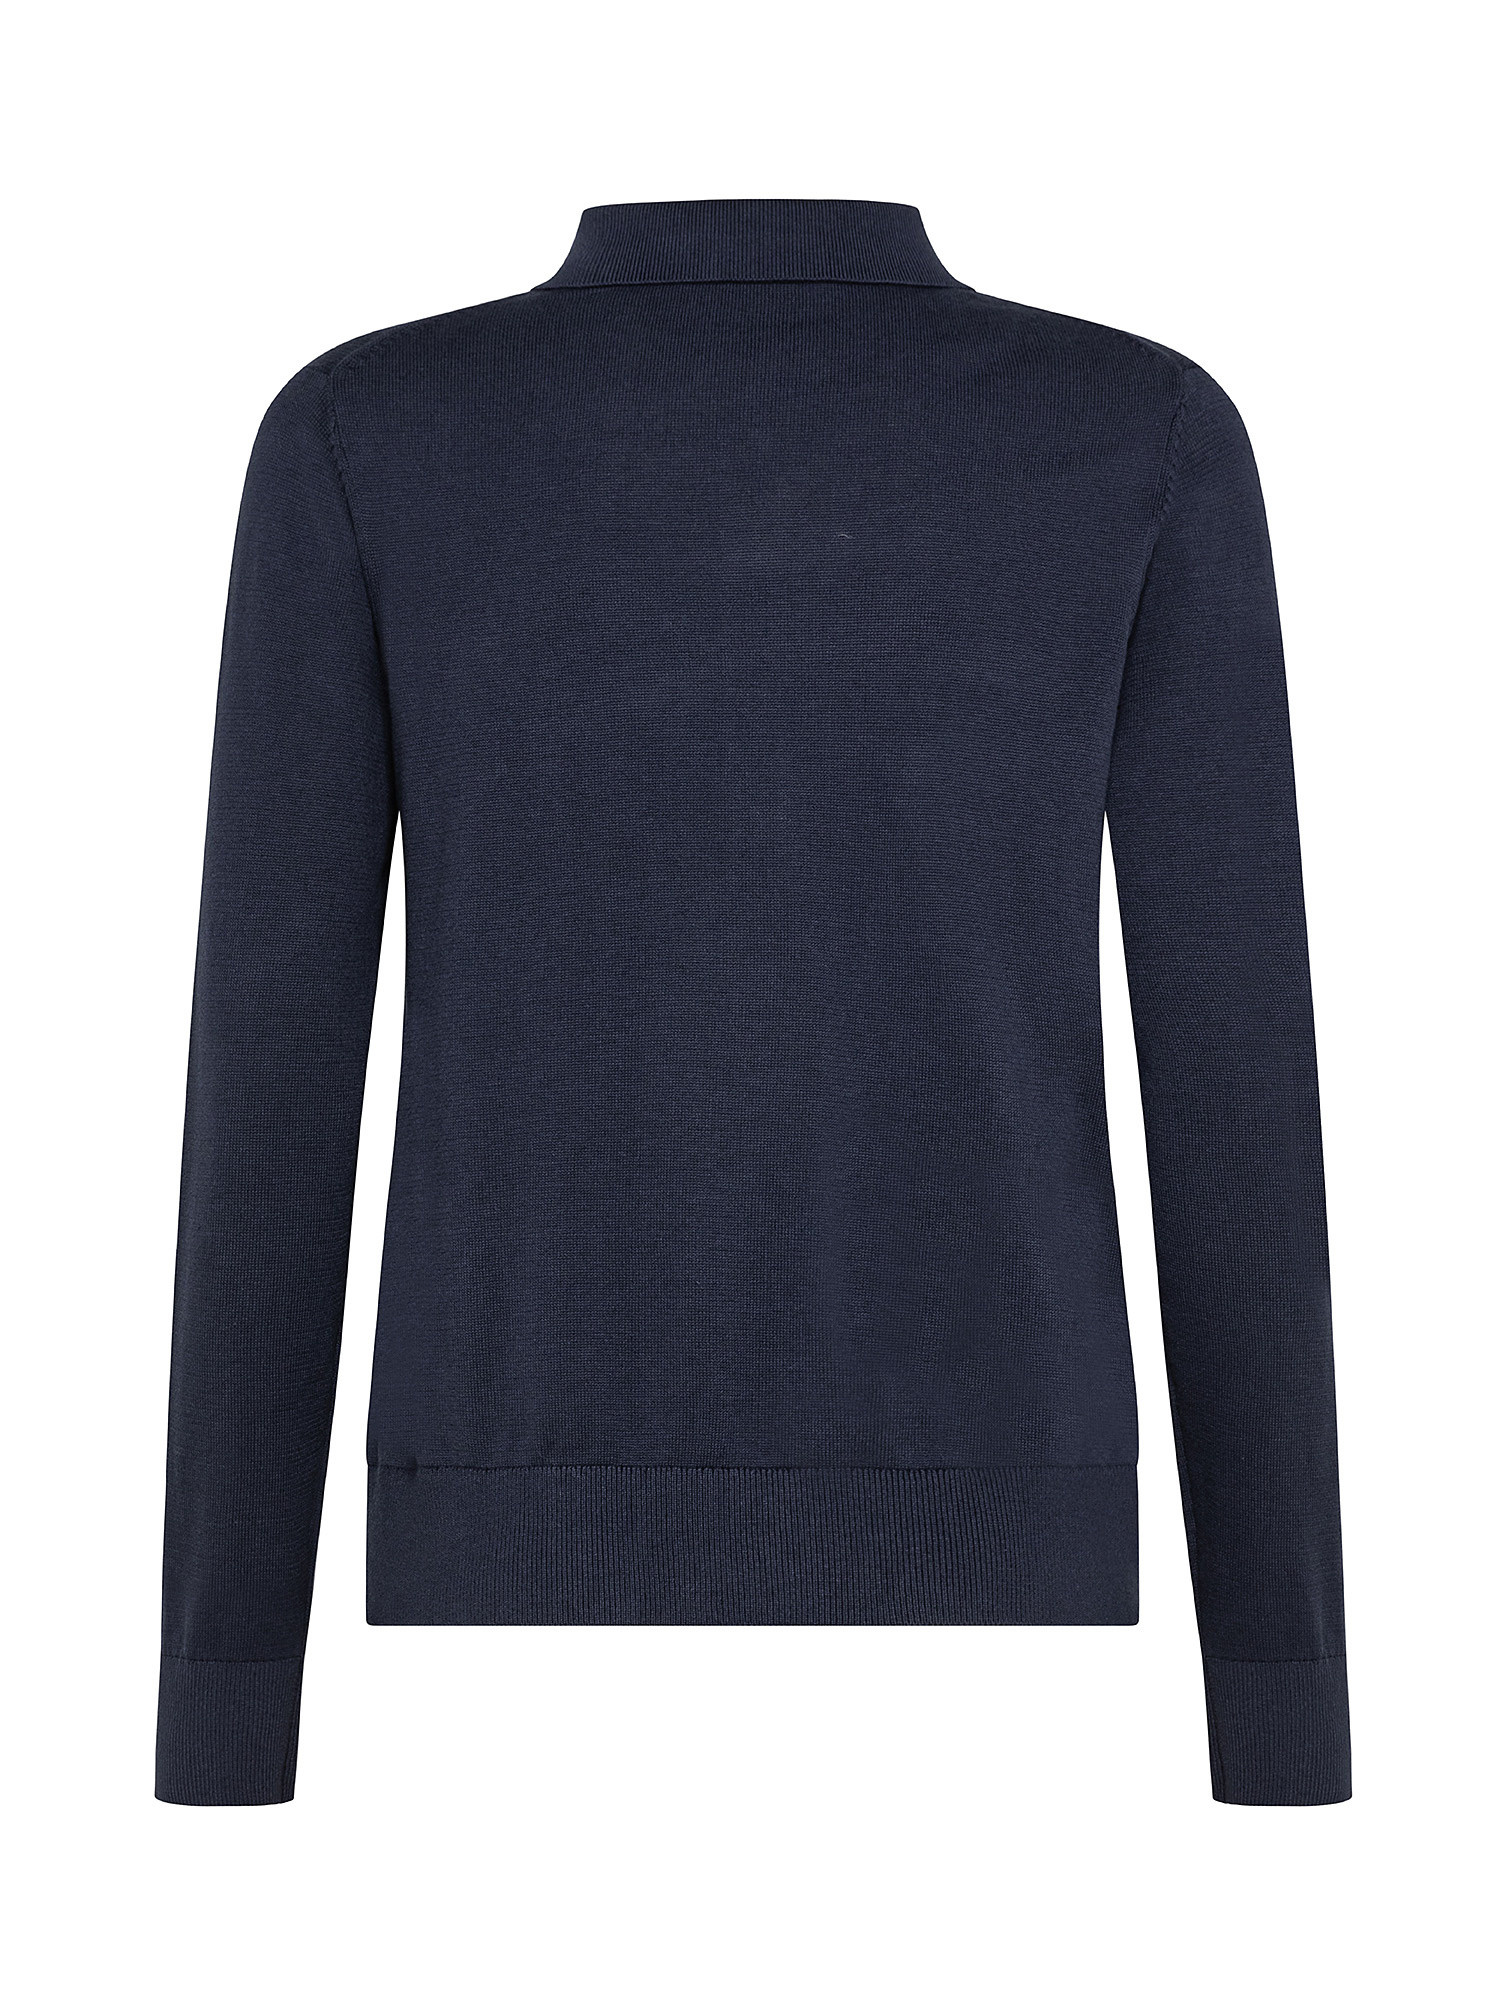 Pullover with polo collar, Dark Blue, large image number 1